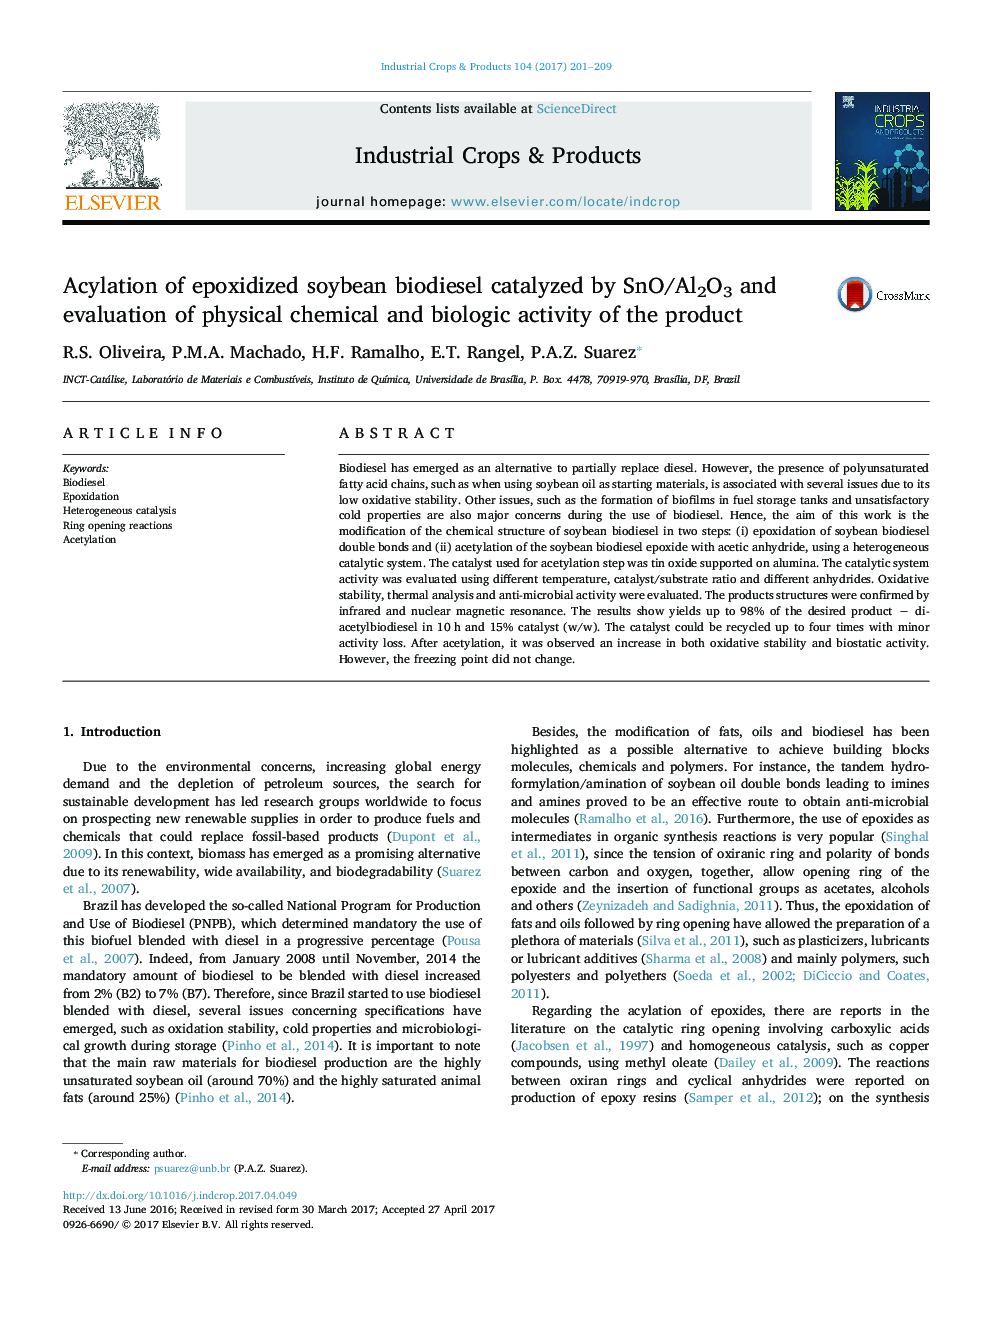 Acylation of epoxidized soybean biodiesel catalyzed by SnO/Al2O3 and evaluation of physical chemical and biologic activity of the product